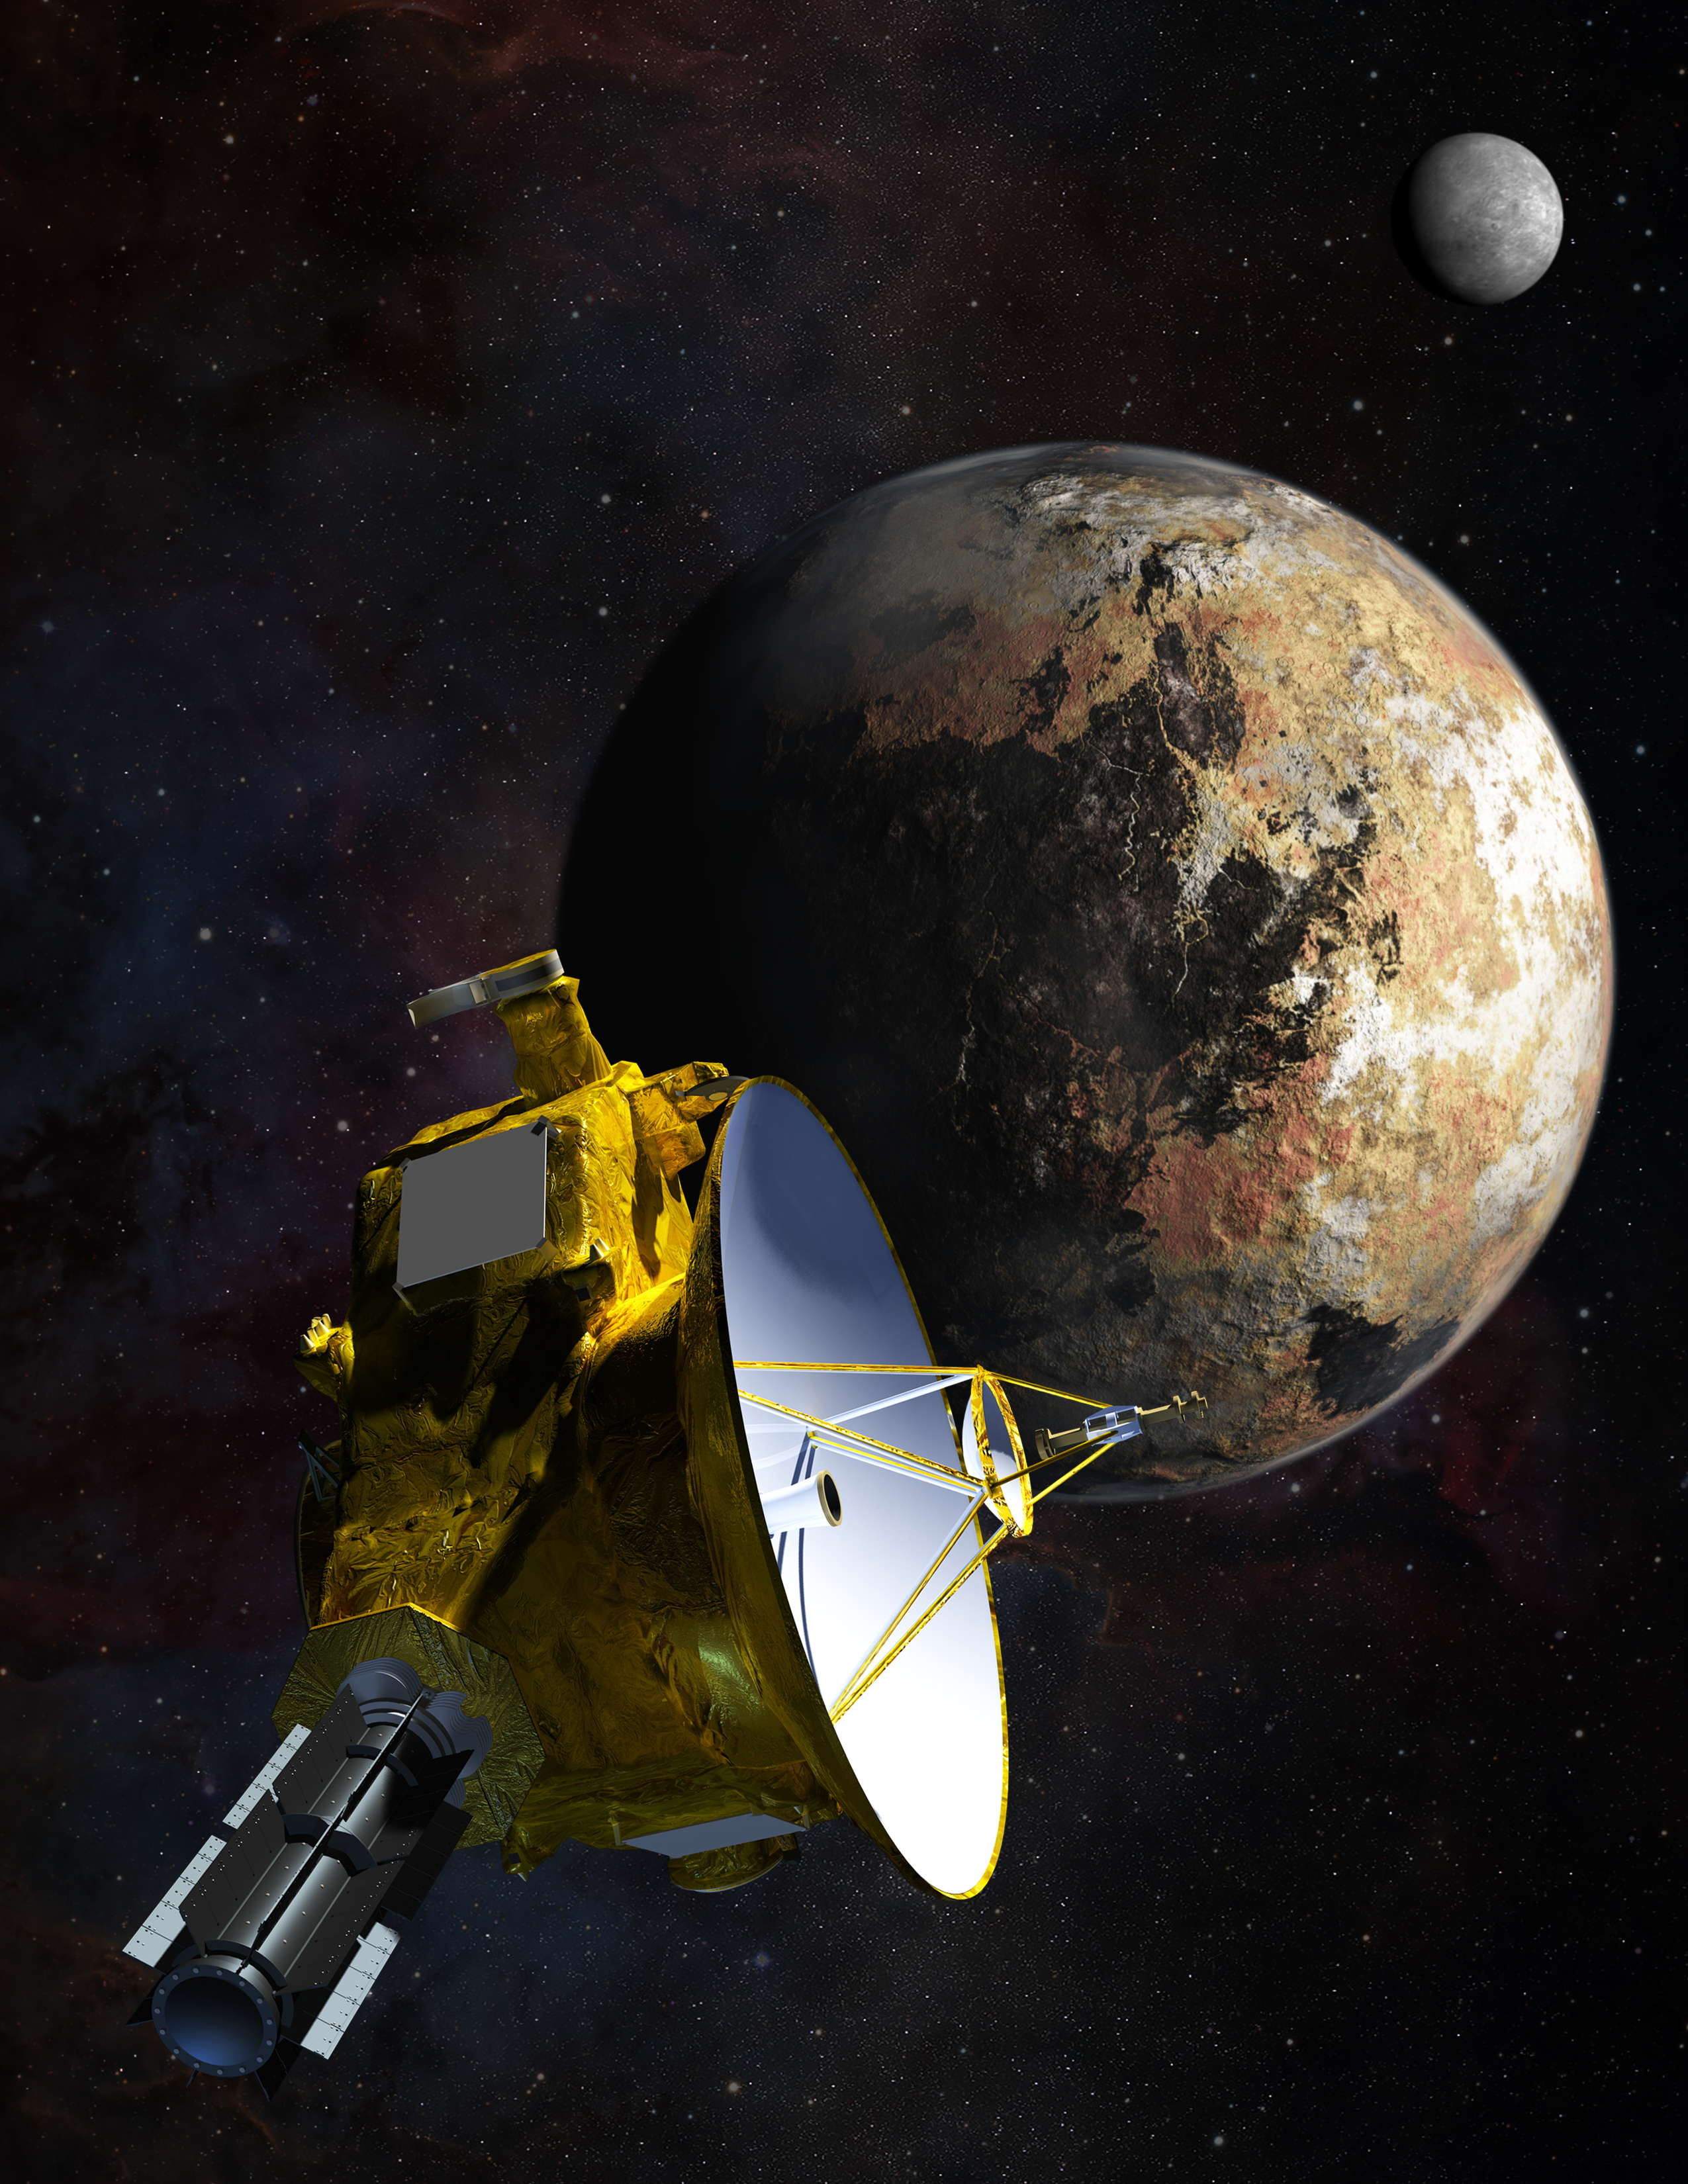 New Horizons spacecraft as it approaches Pluto and it's largest moon, Charon